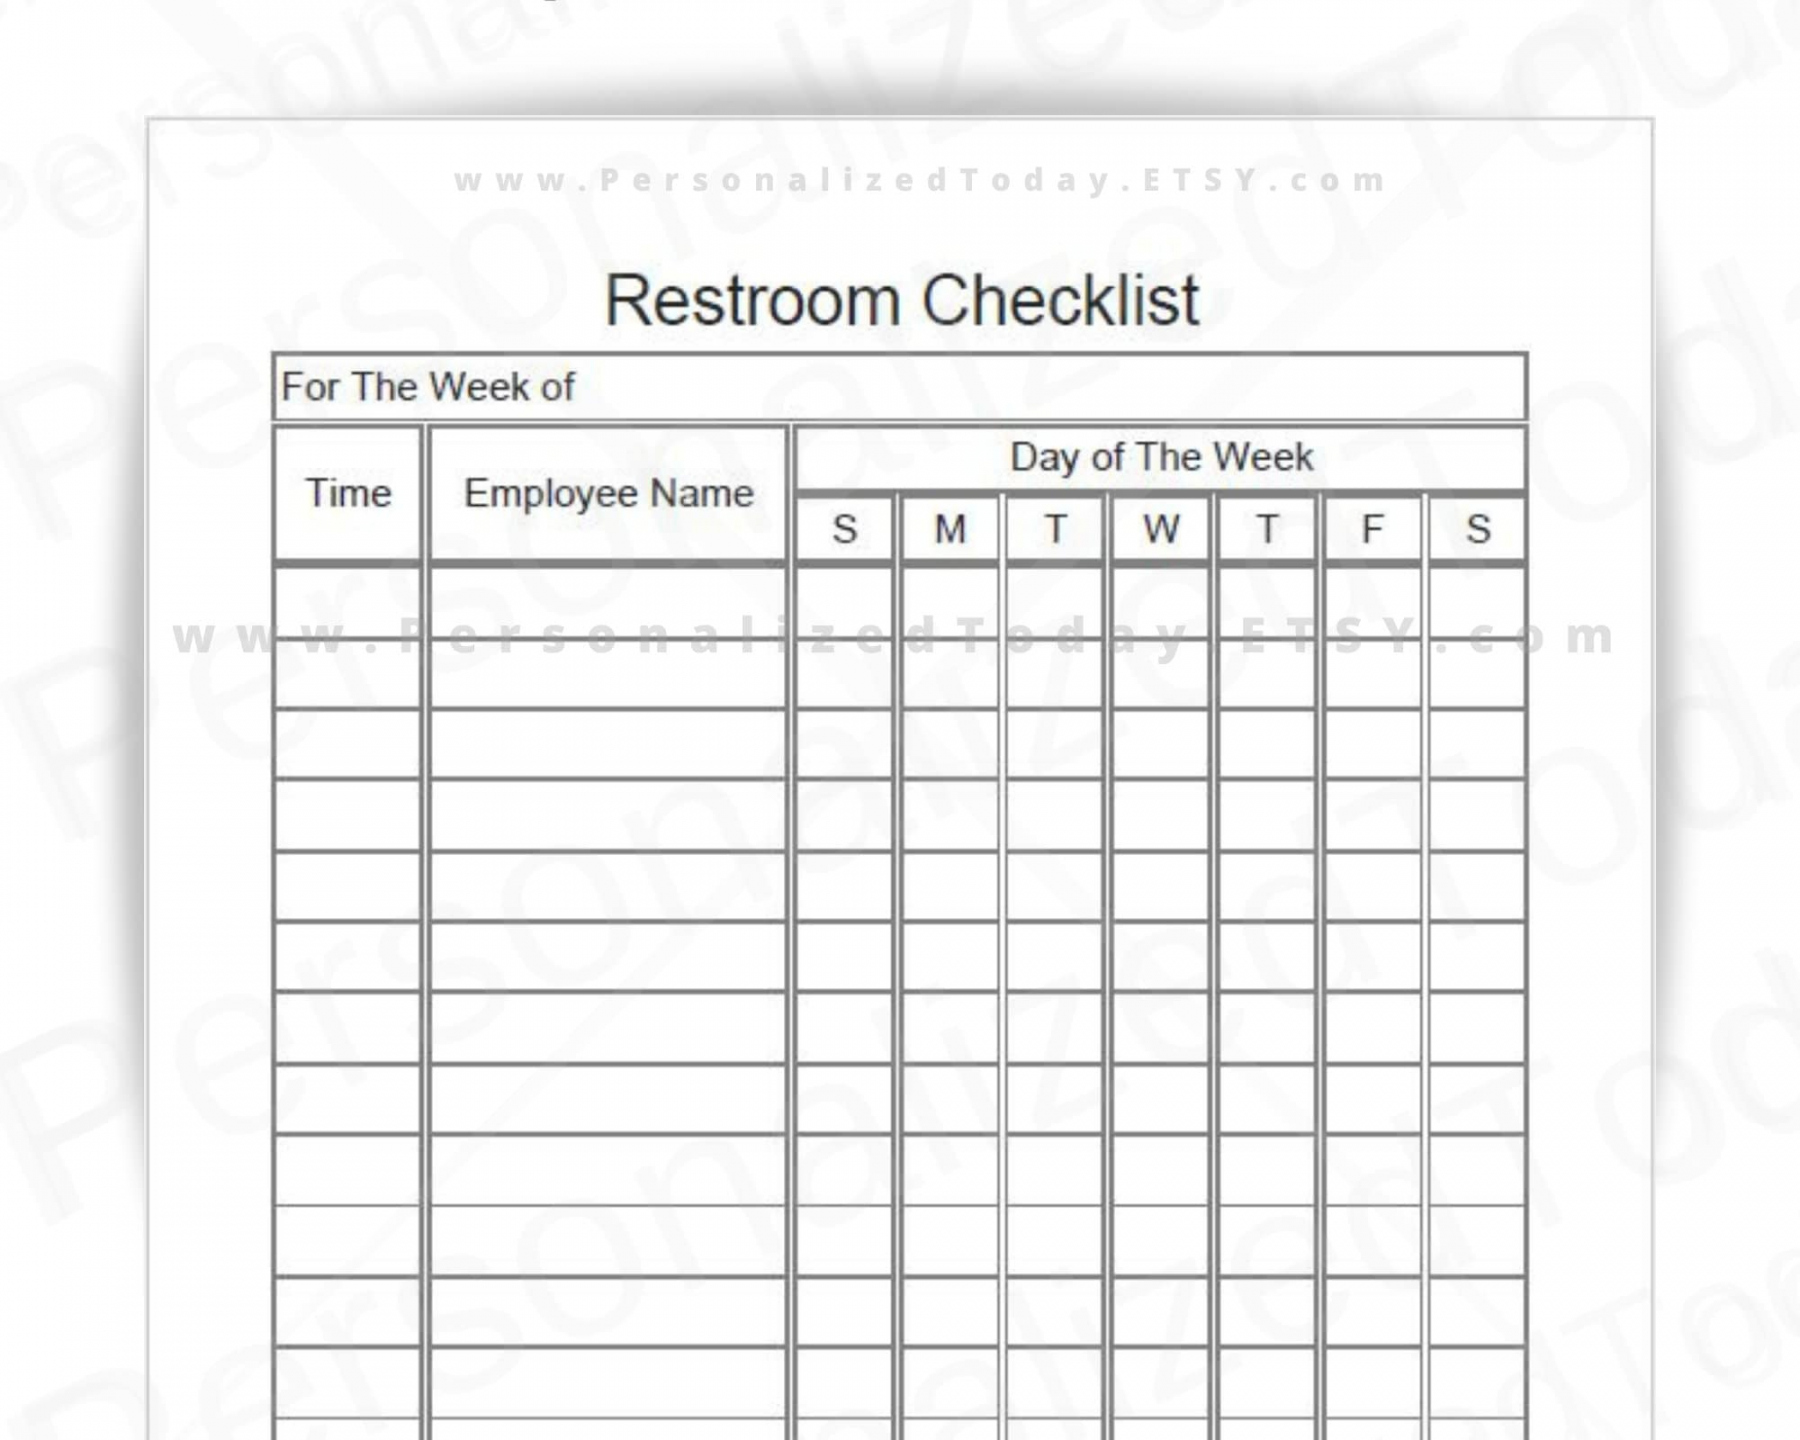 Weekly Bathroom Cleaning Chart With Employee Names Column - Etsy  - FREE Printables - Free Printable Restroom Cleaning Log